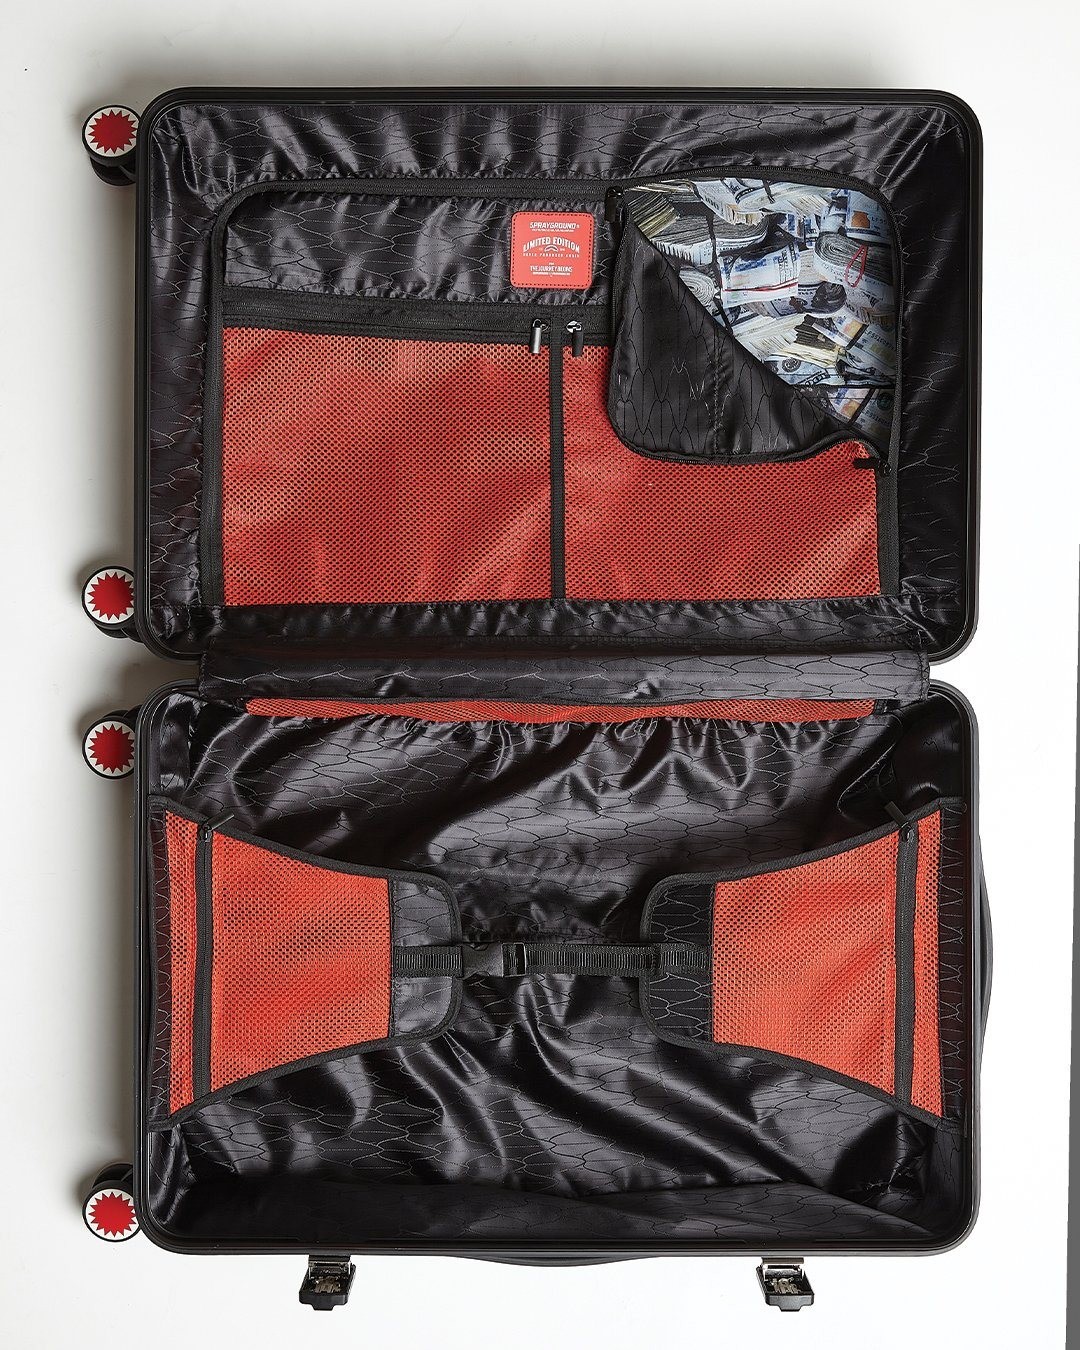 Discount | Sharkitecture (Black) 29.5” Full-Size Luggage Sprayground Sale - Discount | Sharkitecture (Black) 29.5” Full-Size Luggage Sprayground Sale-01-9